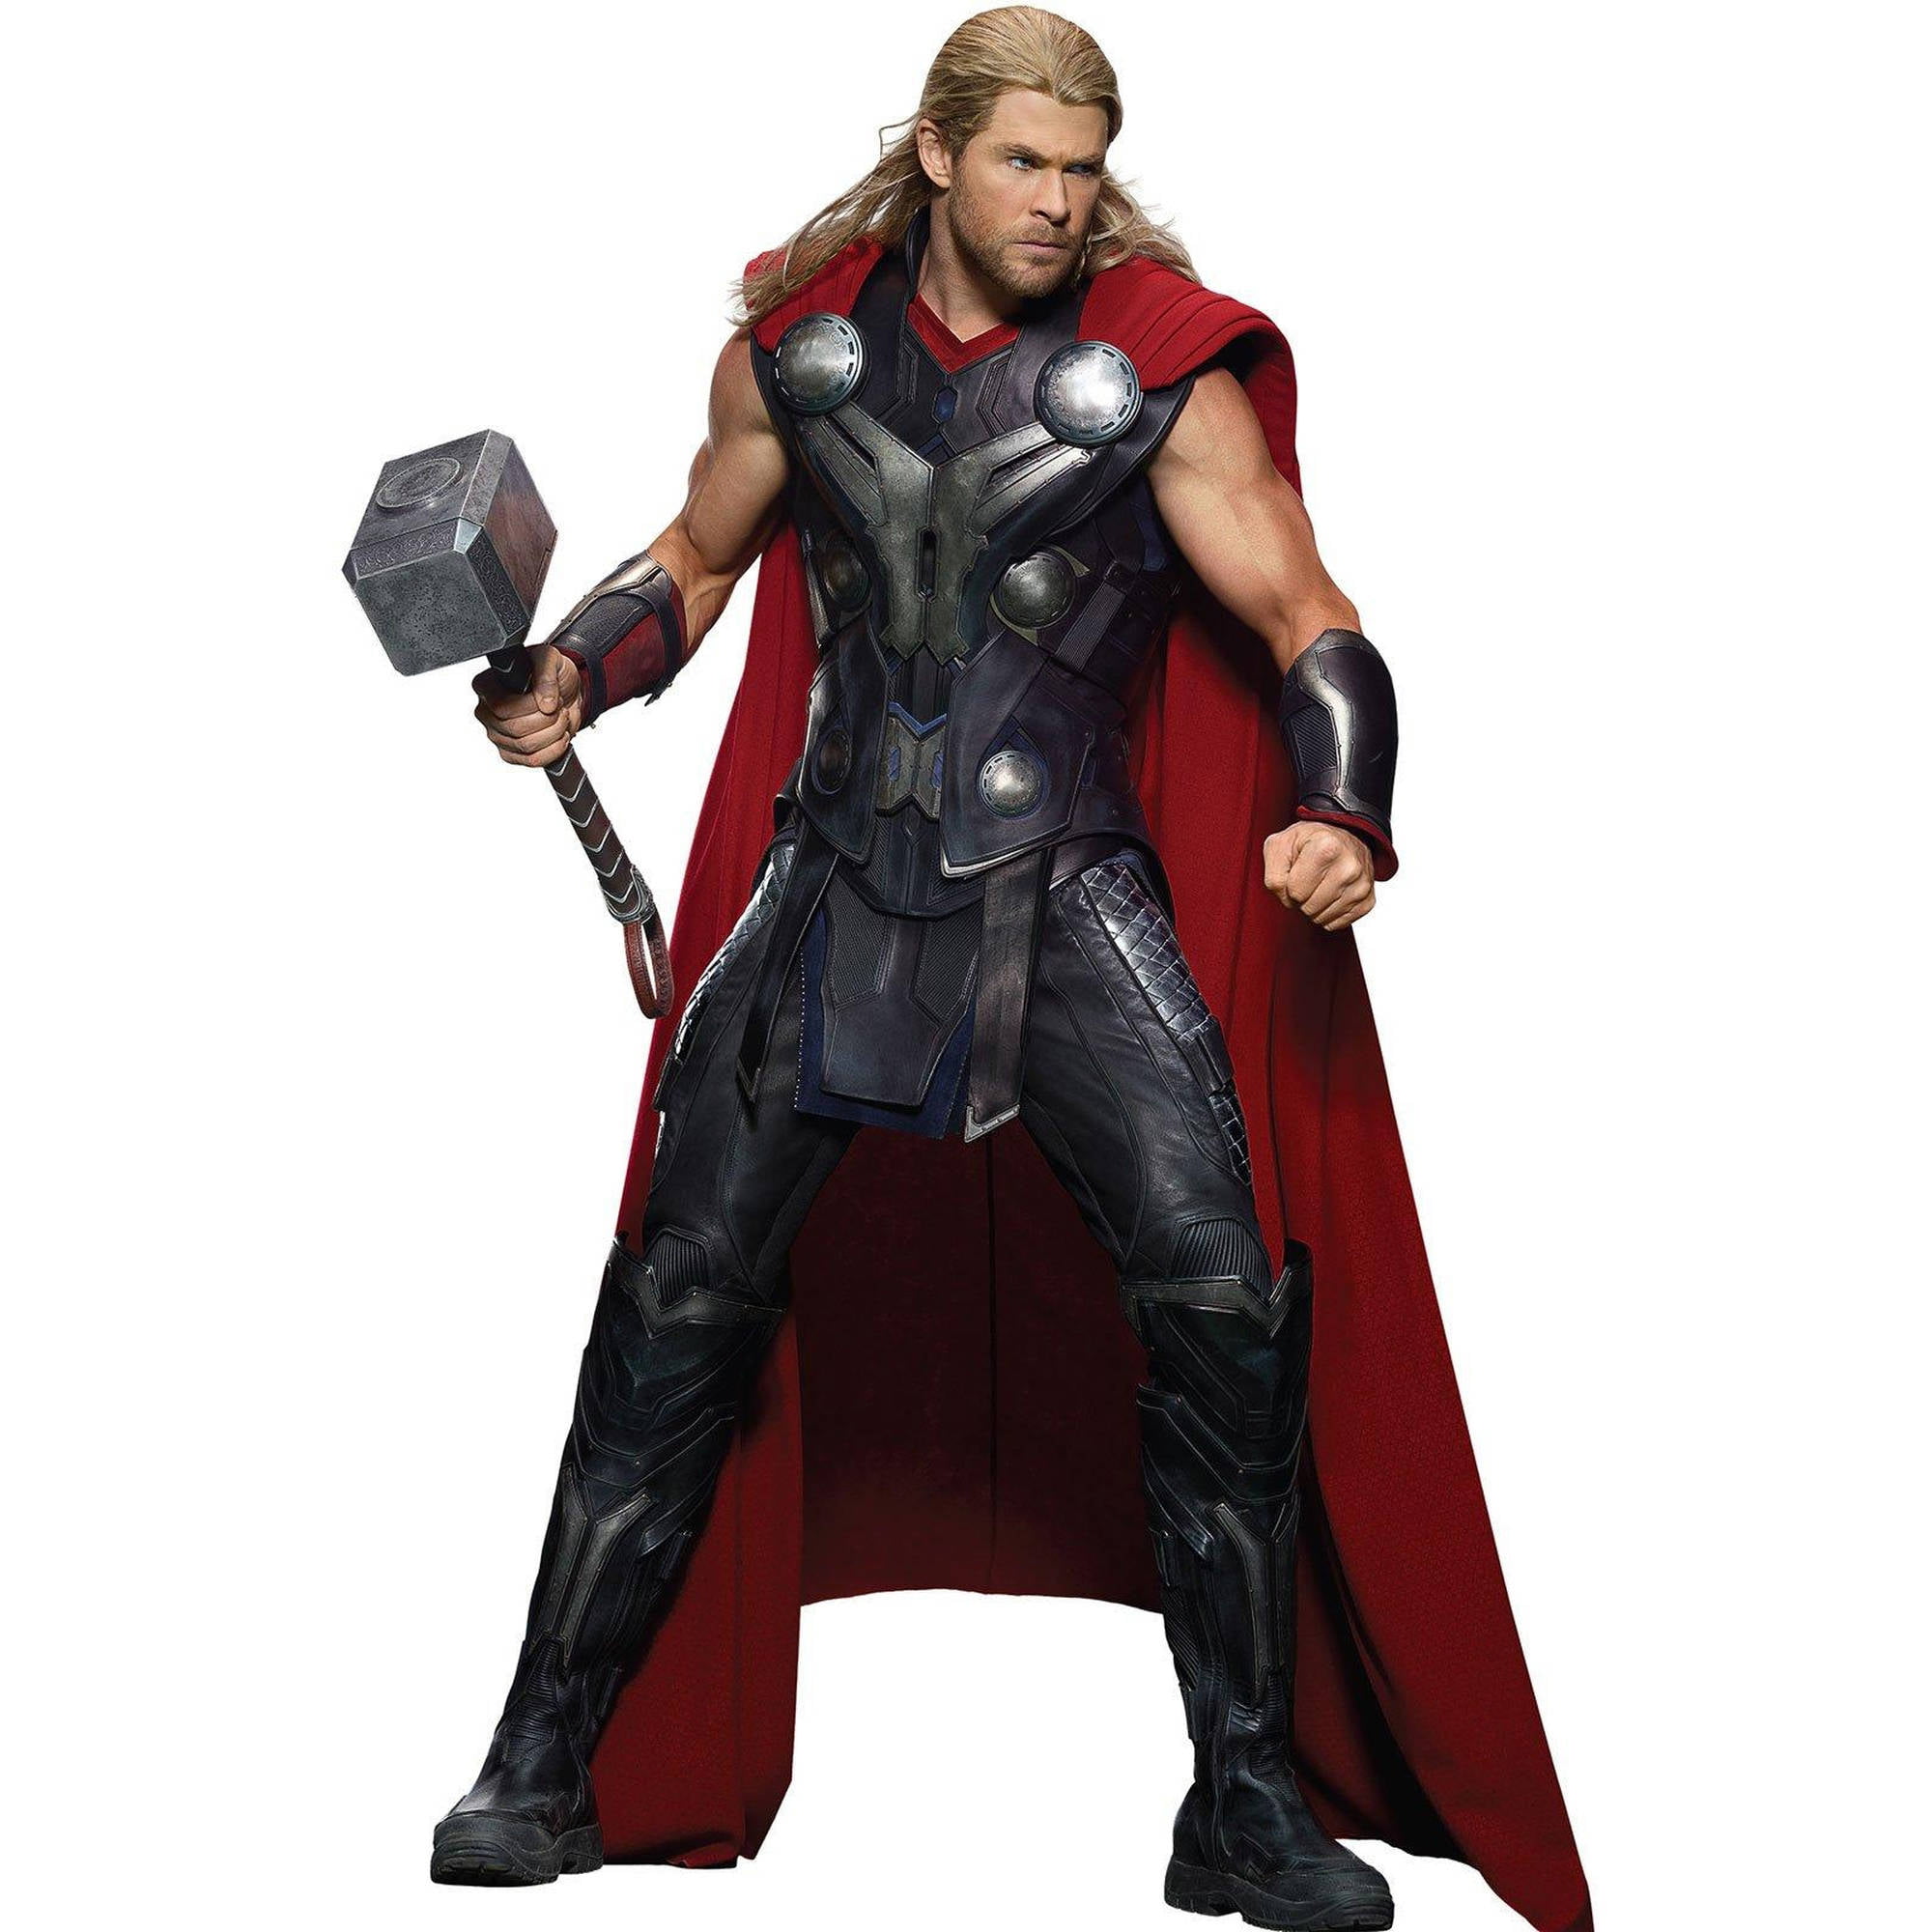 Marvel Avengers Age Of Ultron Thor Standup, 6' Tall 